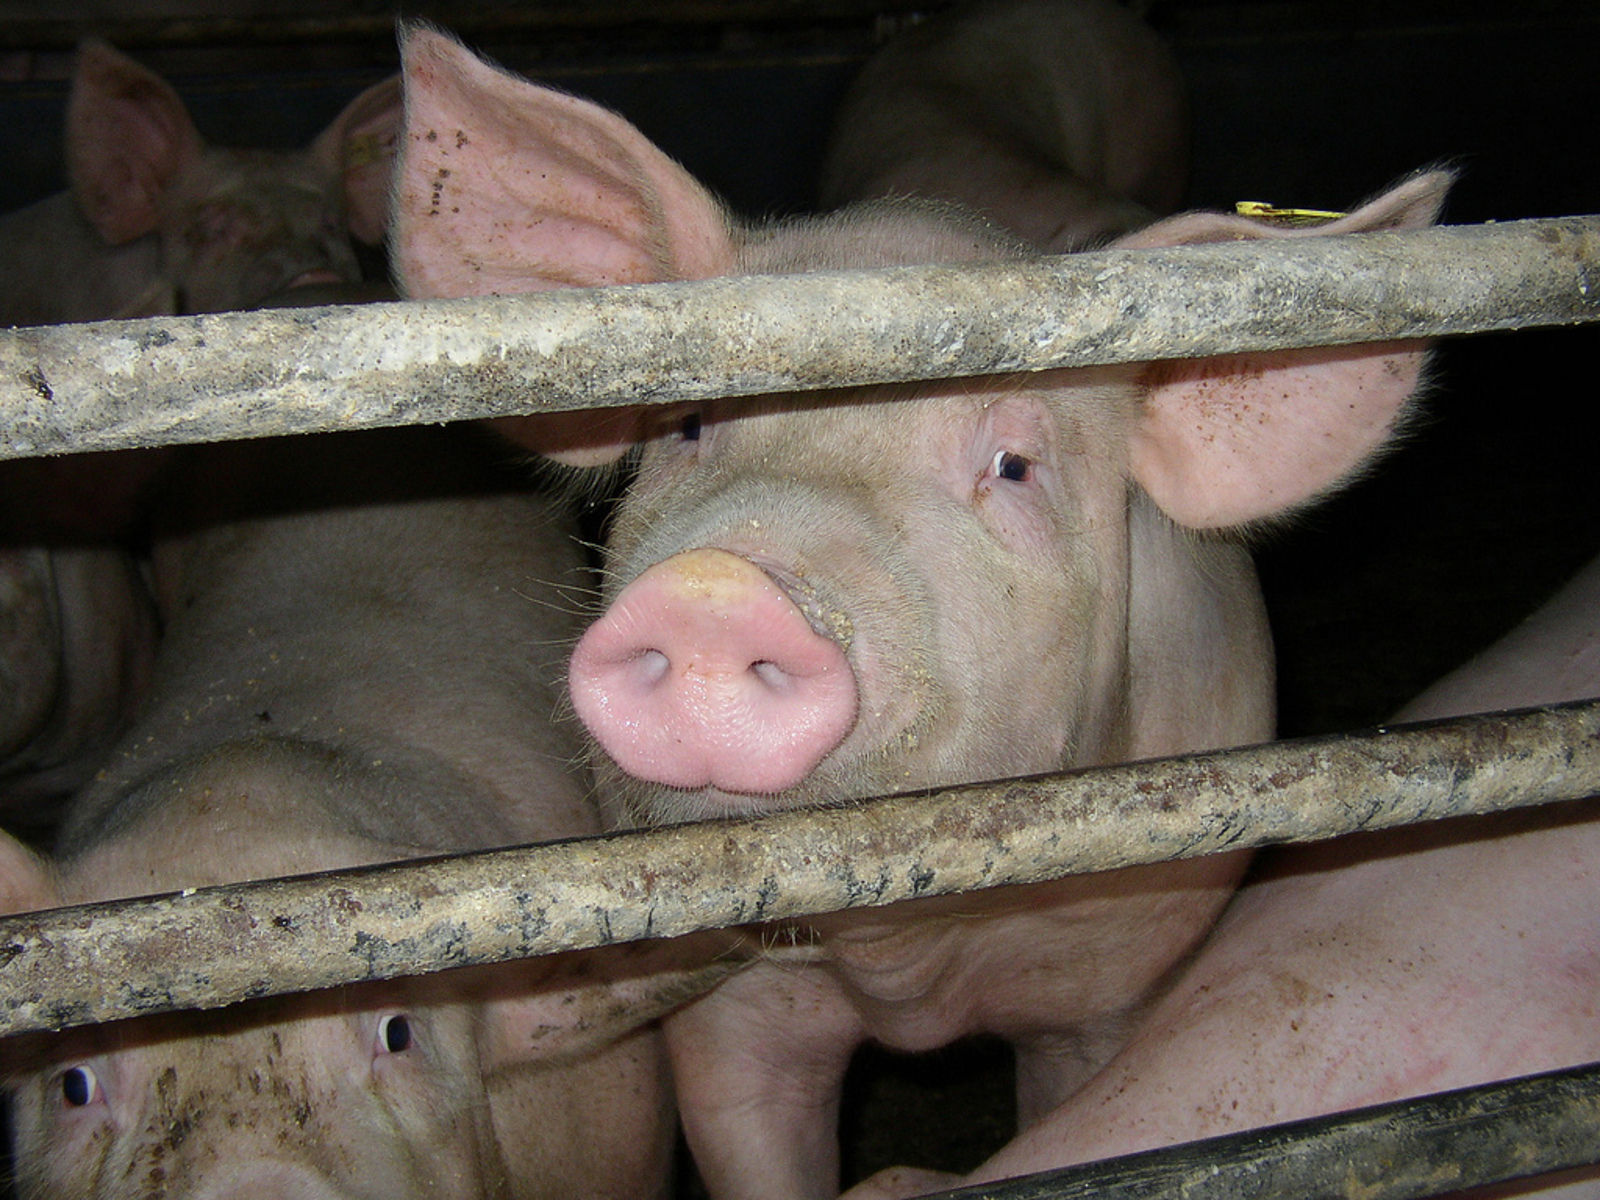 7 All-Star Organizations Fighting for Farm Animal Protection